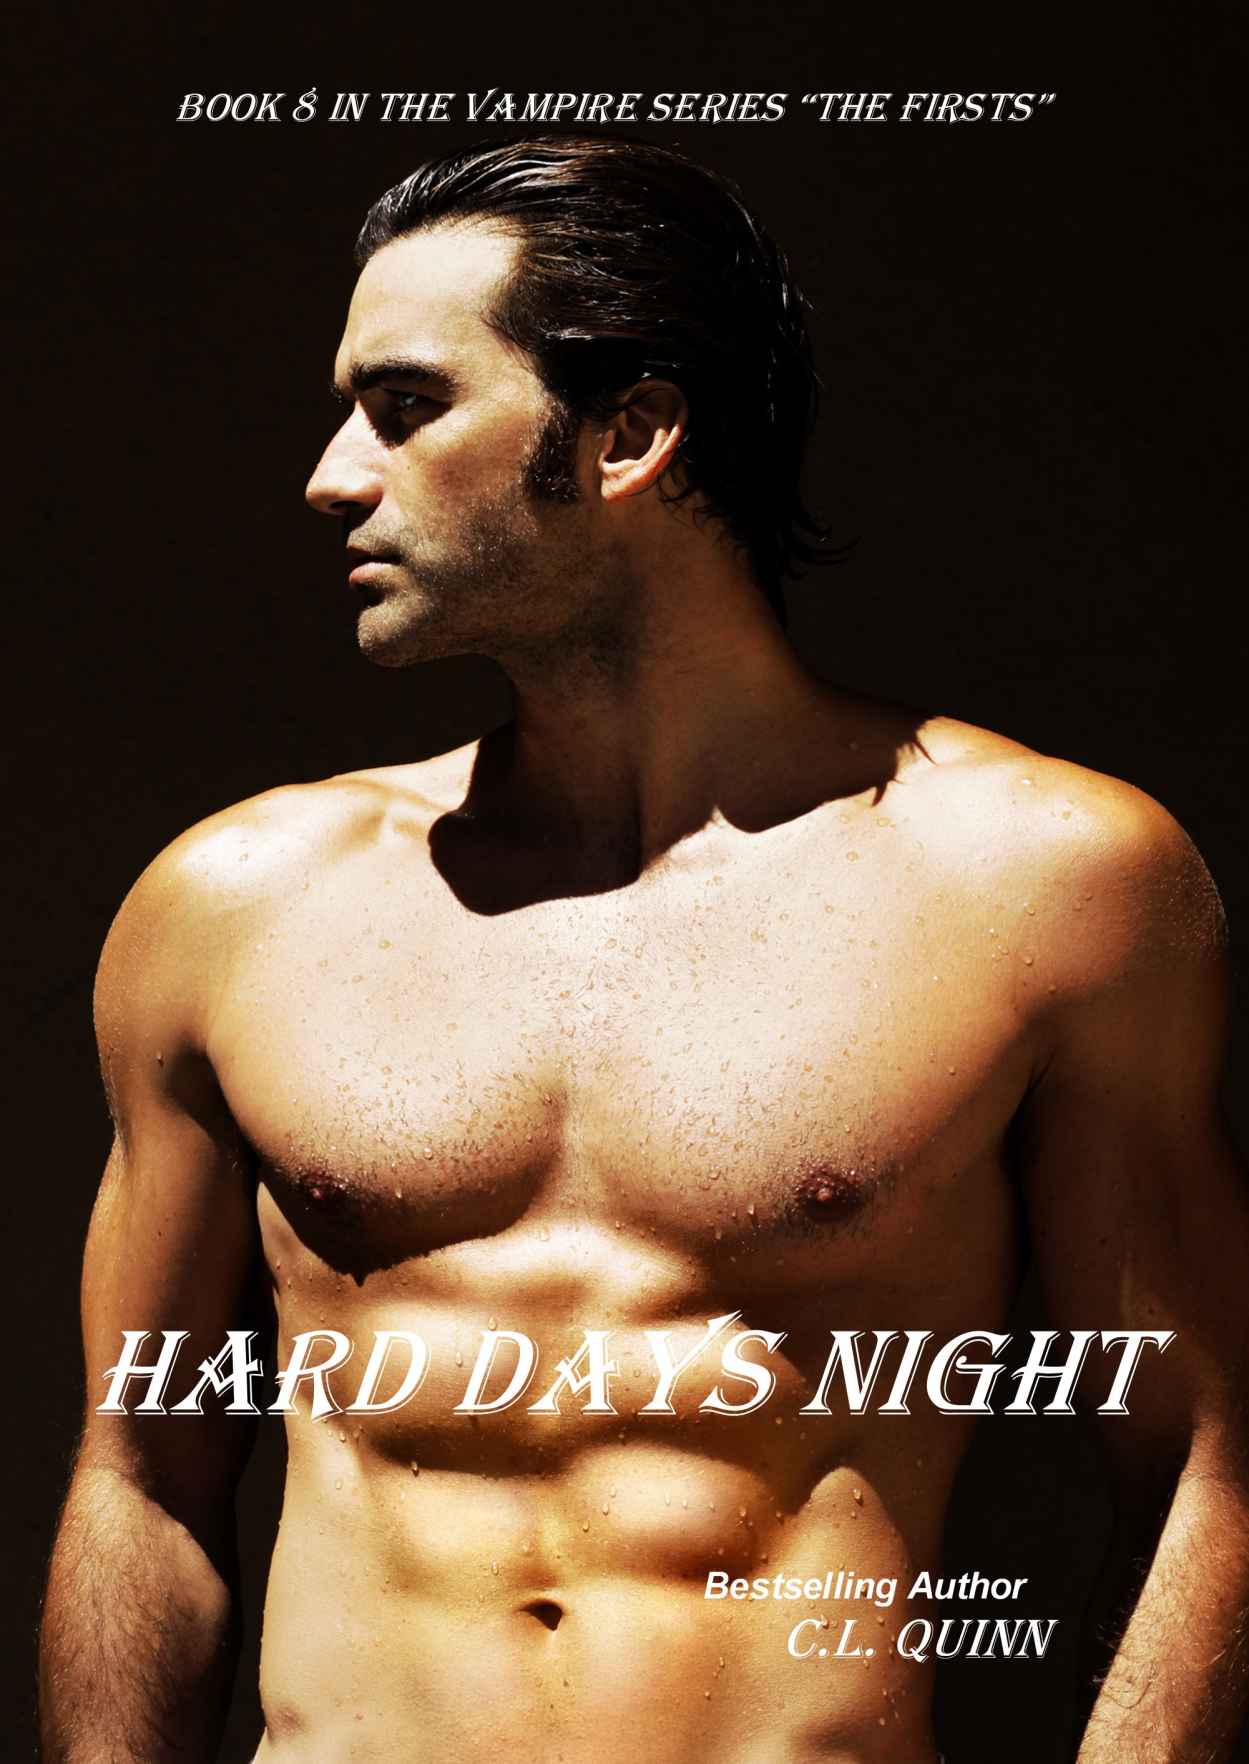 Hard Days Night (The Firsts Book 8) by C.L. Quinn